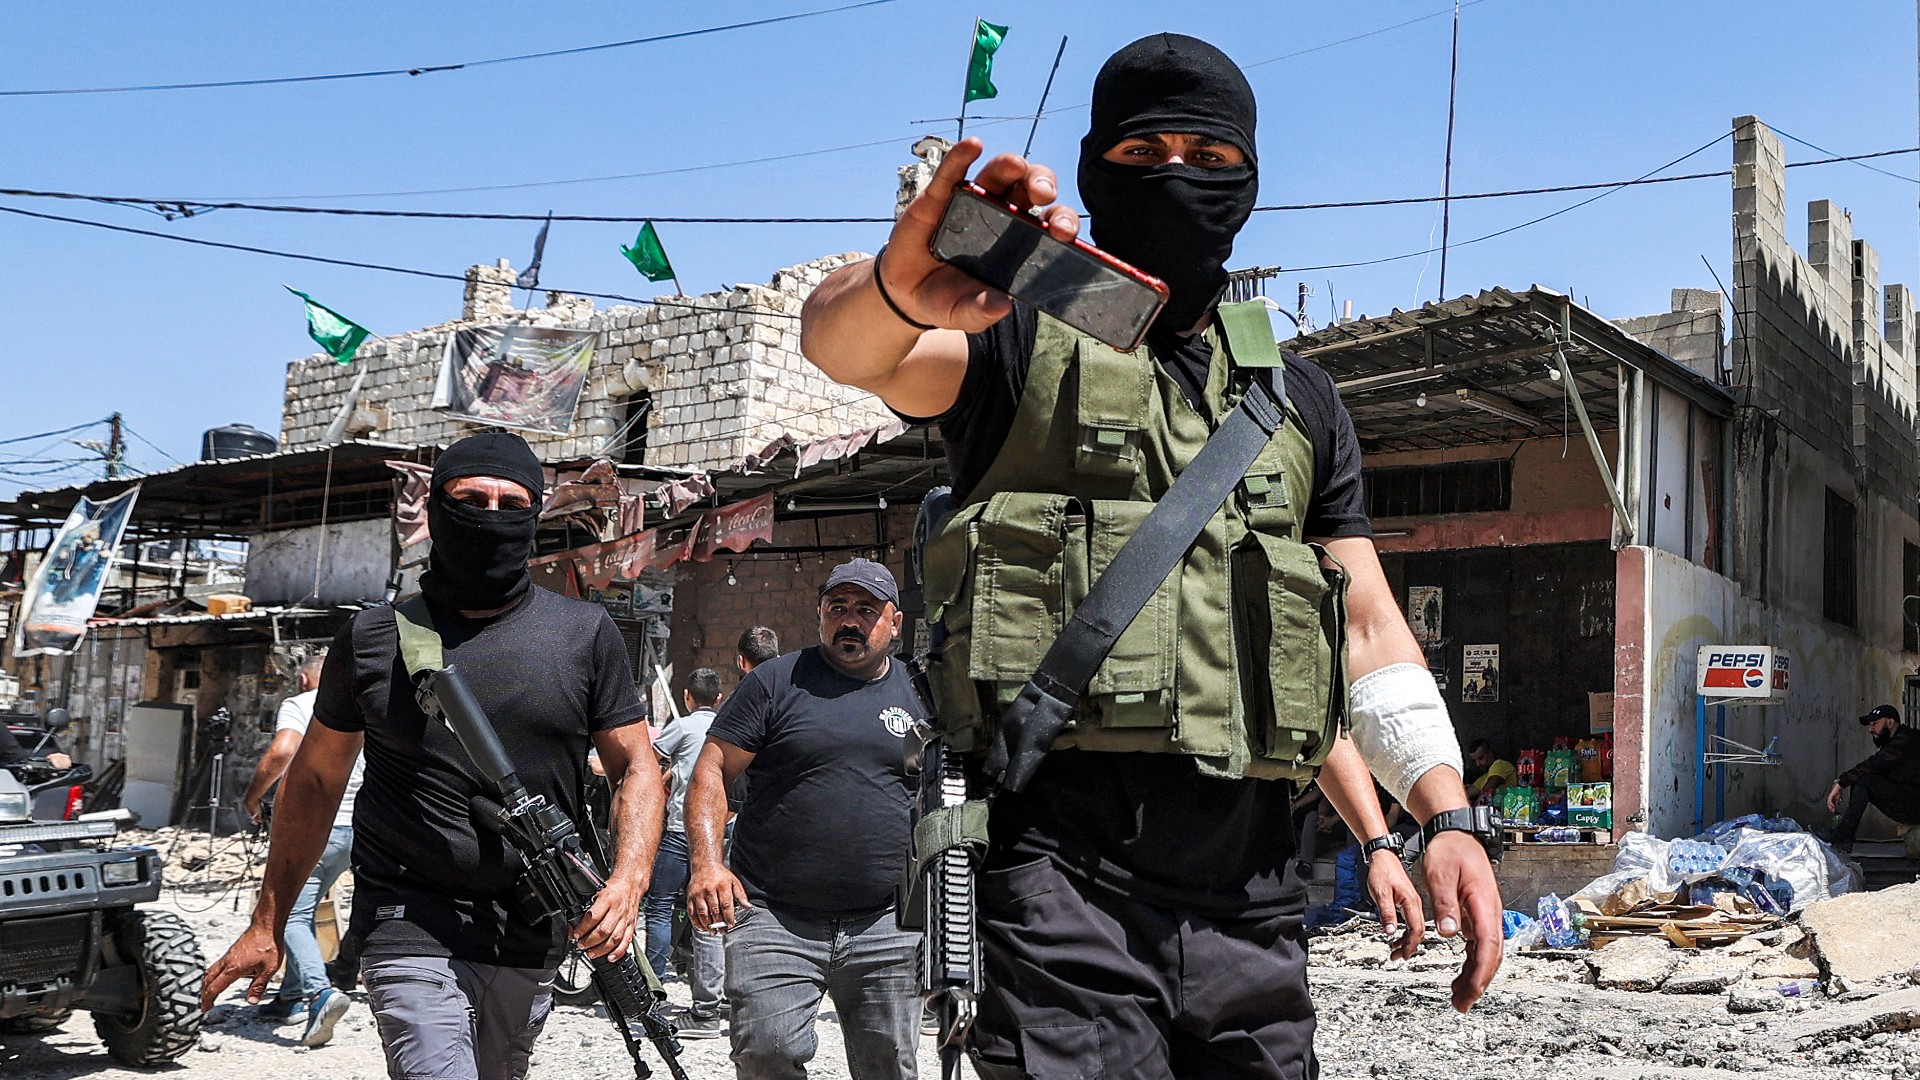 A masked Palestinian fighter gestures with his phone as he walks with others along a street in Jenin in the occupied West Bank on 5 July (AFP)